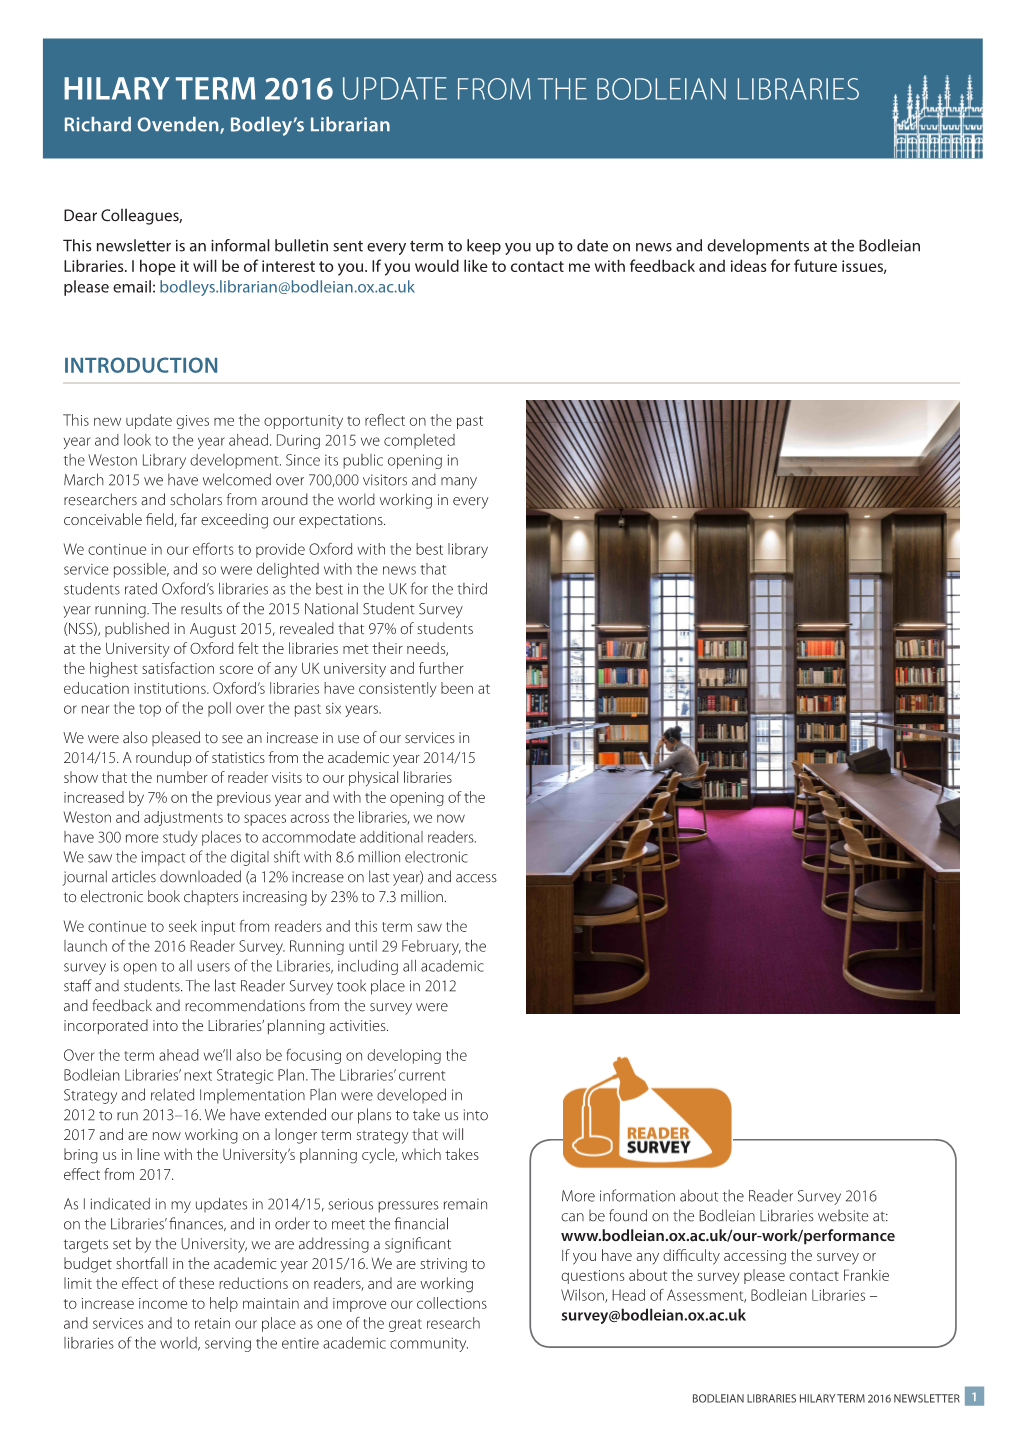 HILARY TERM 2016 UPDATE from the BODLEIAN LIBRARIES Richard Ovenden, Bodley’S Librarian